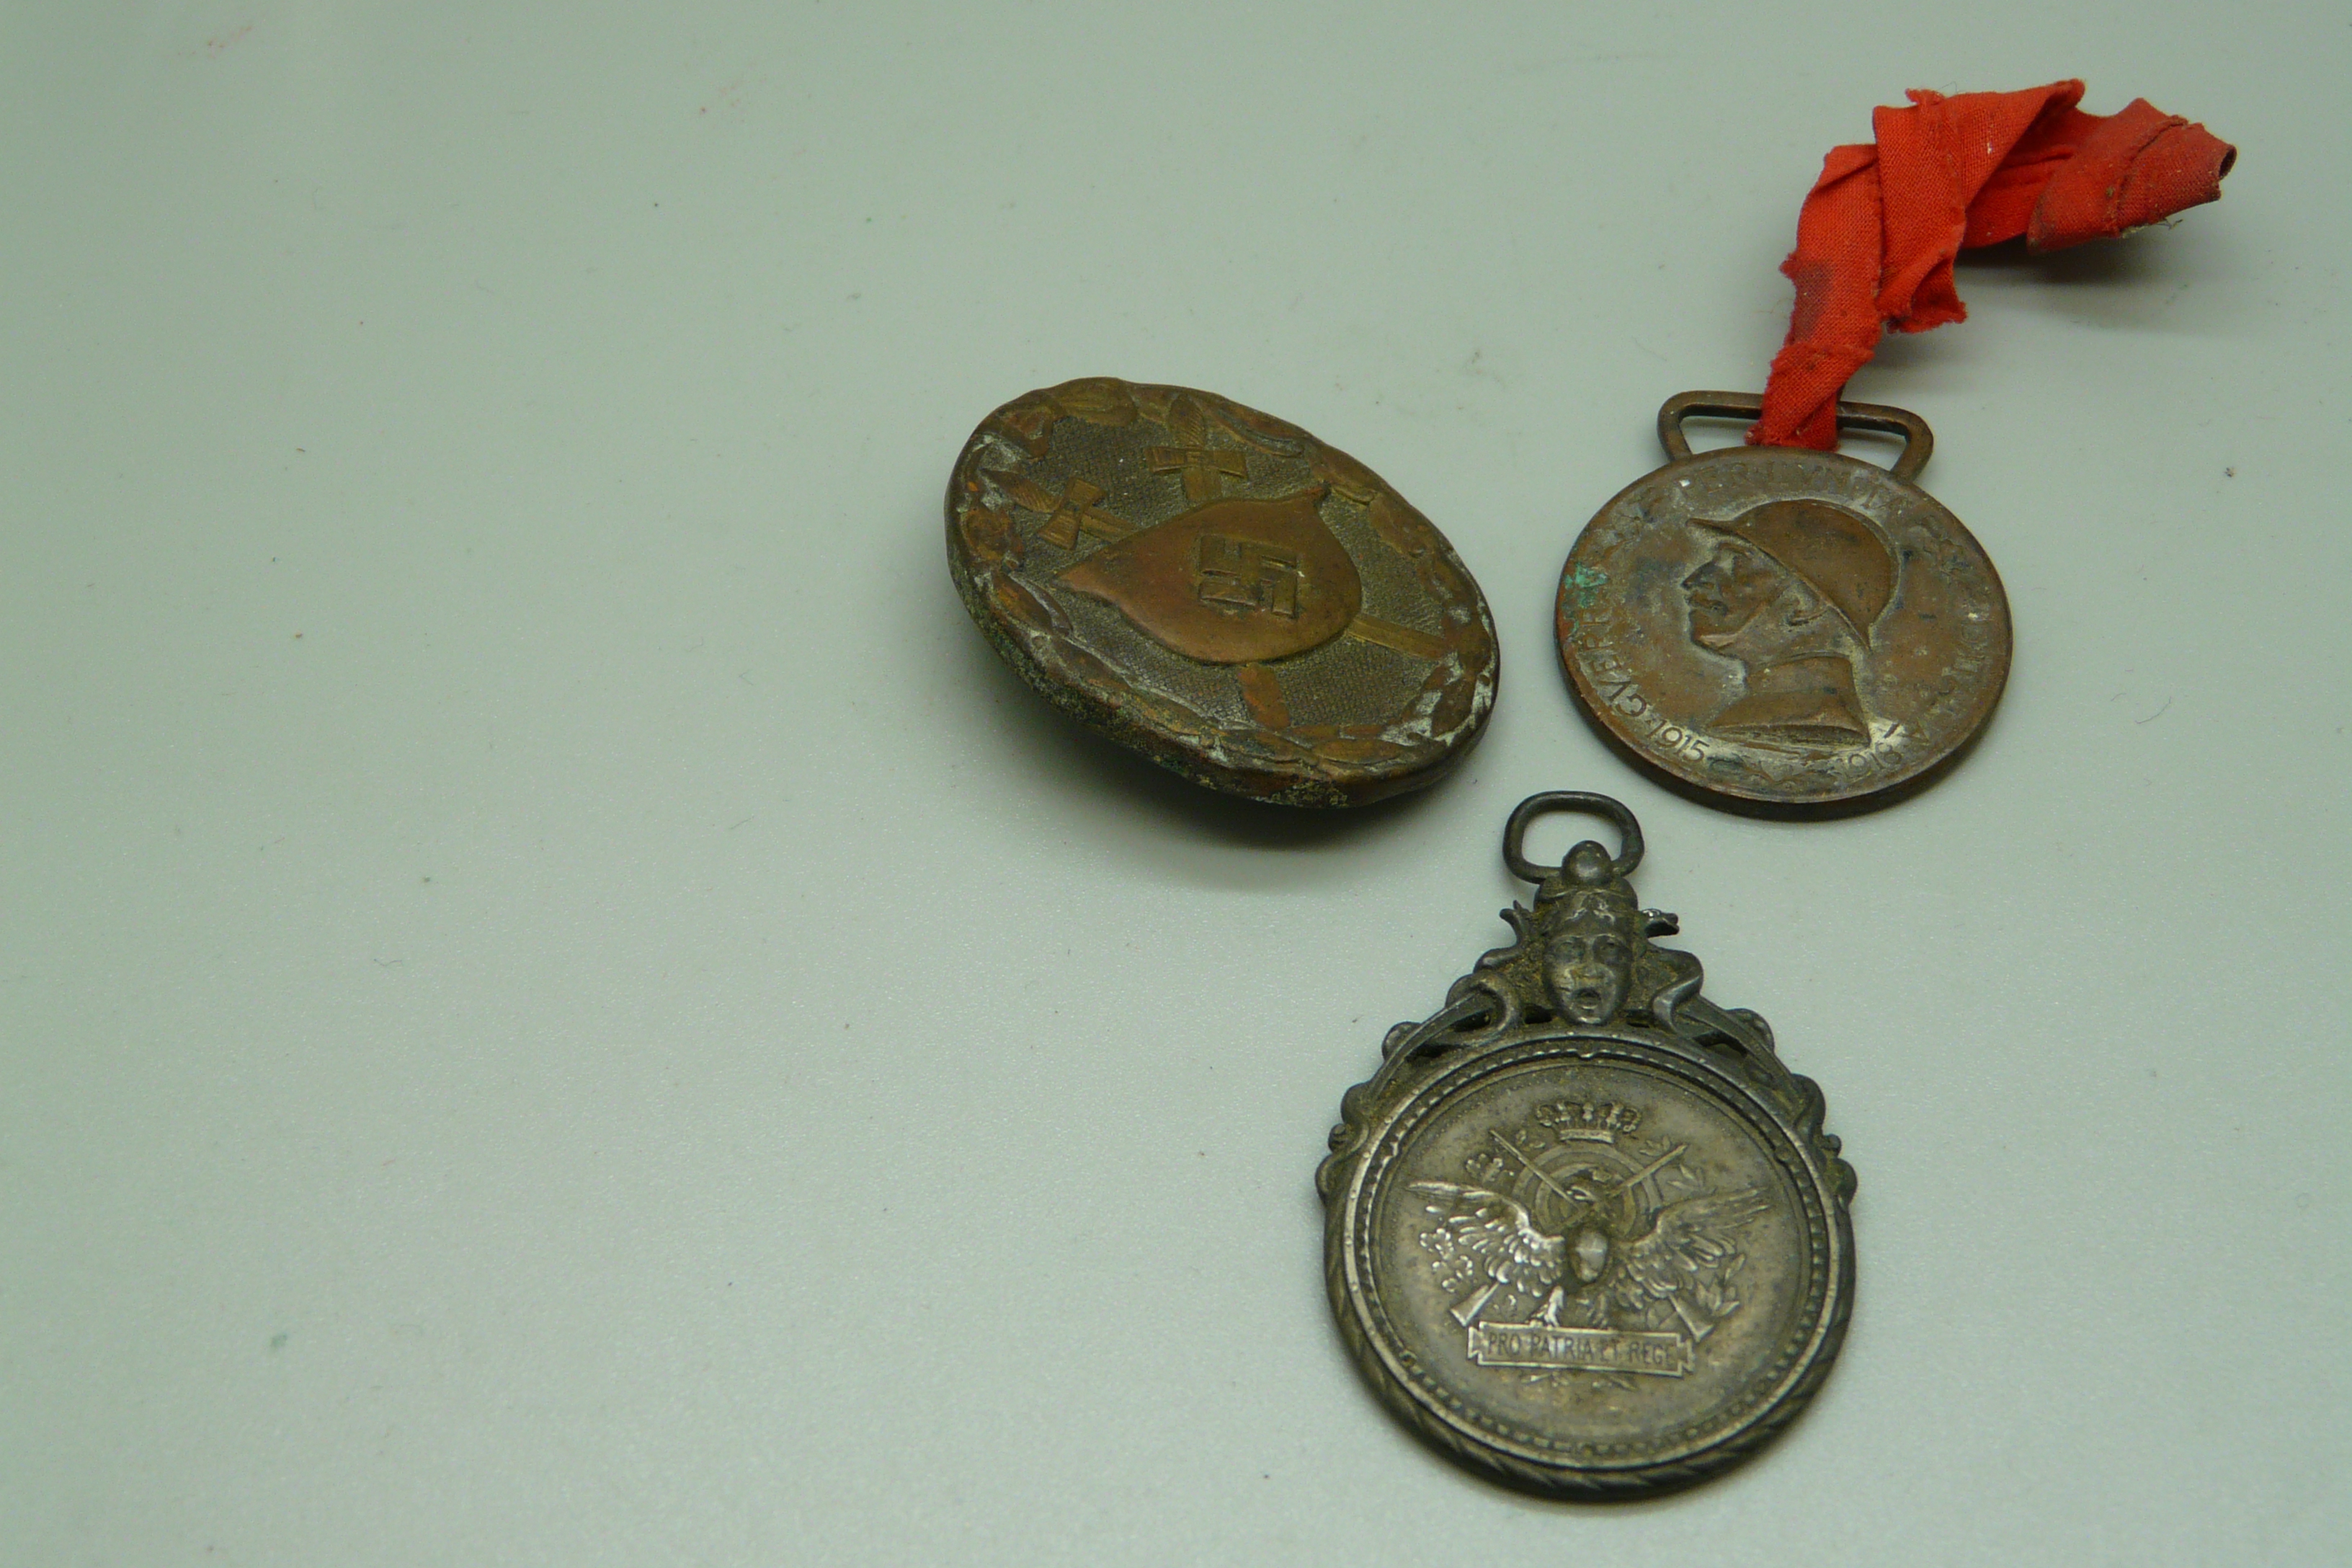 A German WWII badge and two medallions